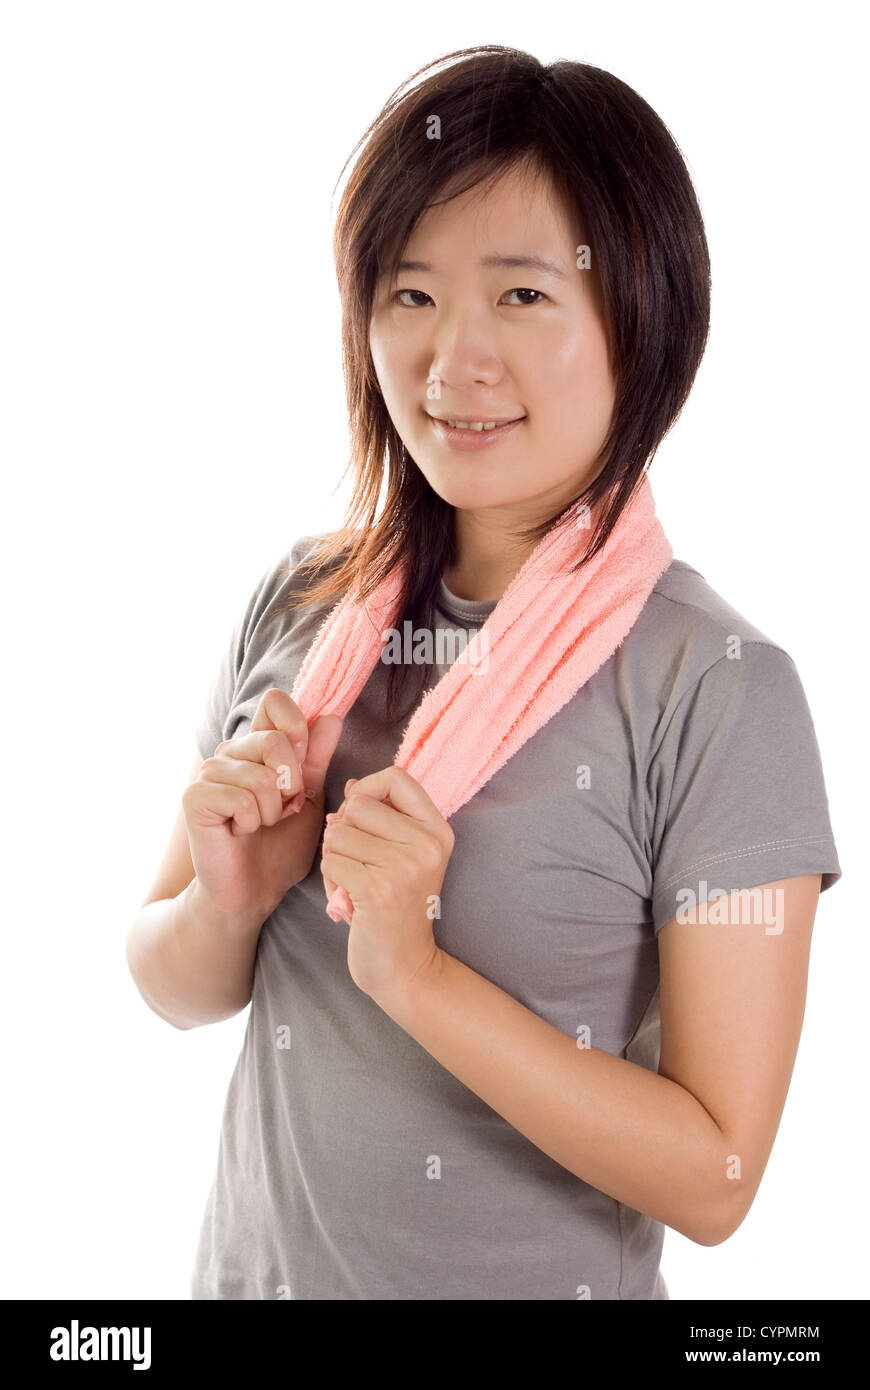 Female Asian in sports attire with a towel over white background Stock  Photo